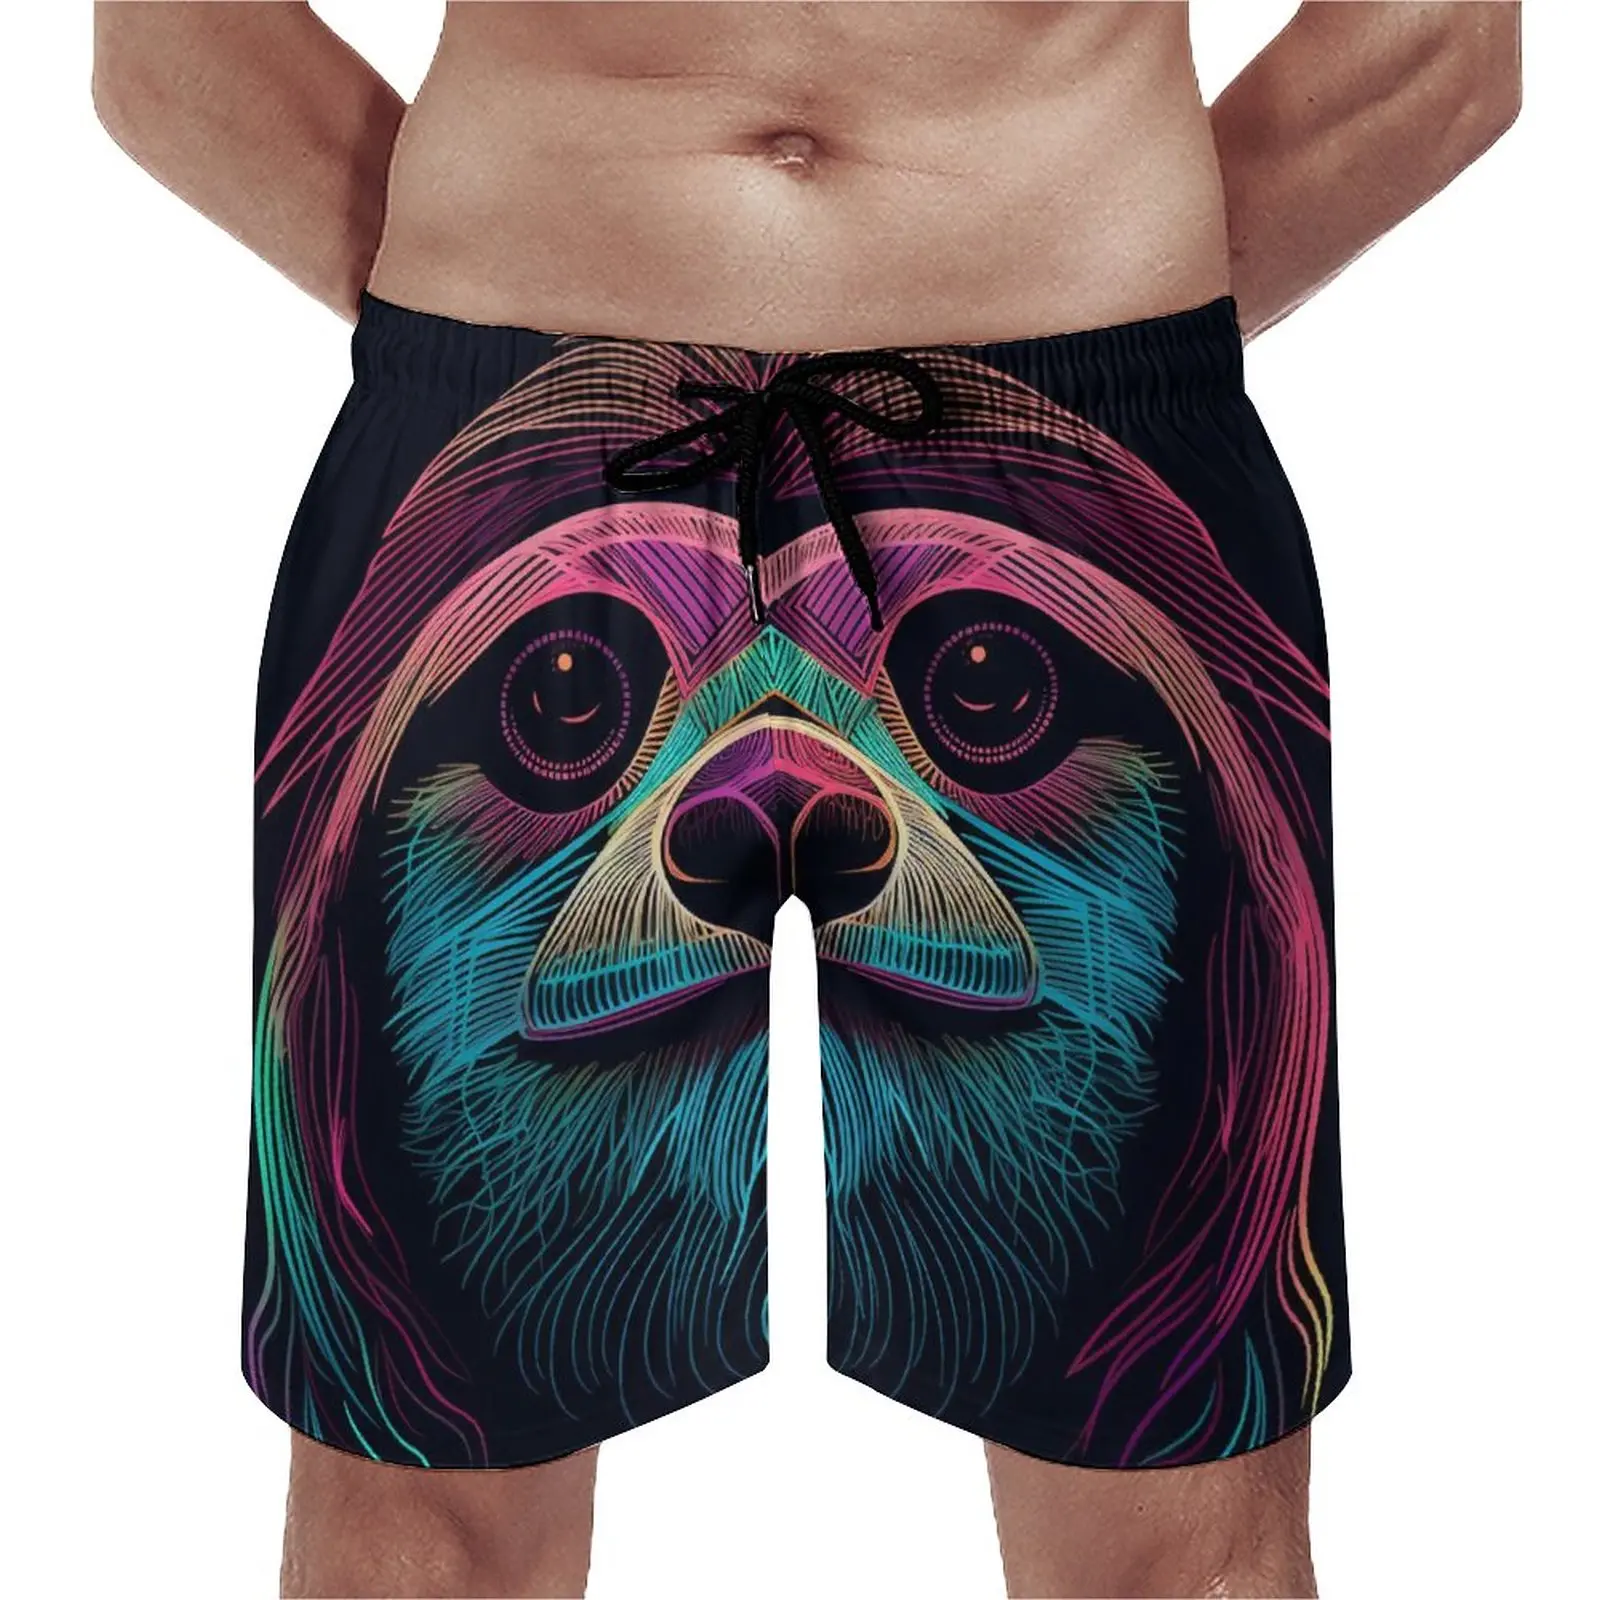 

Summer Board Shorts Sloth Sports Fitness Line Art Neon Graphic Board Short Pants Fashion Fast Dry Swimming Trunks Plus Size